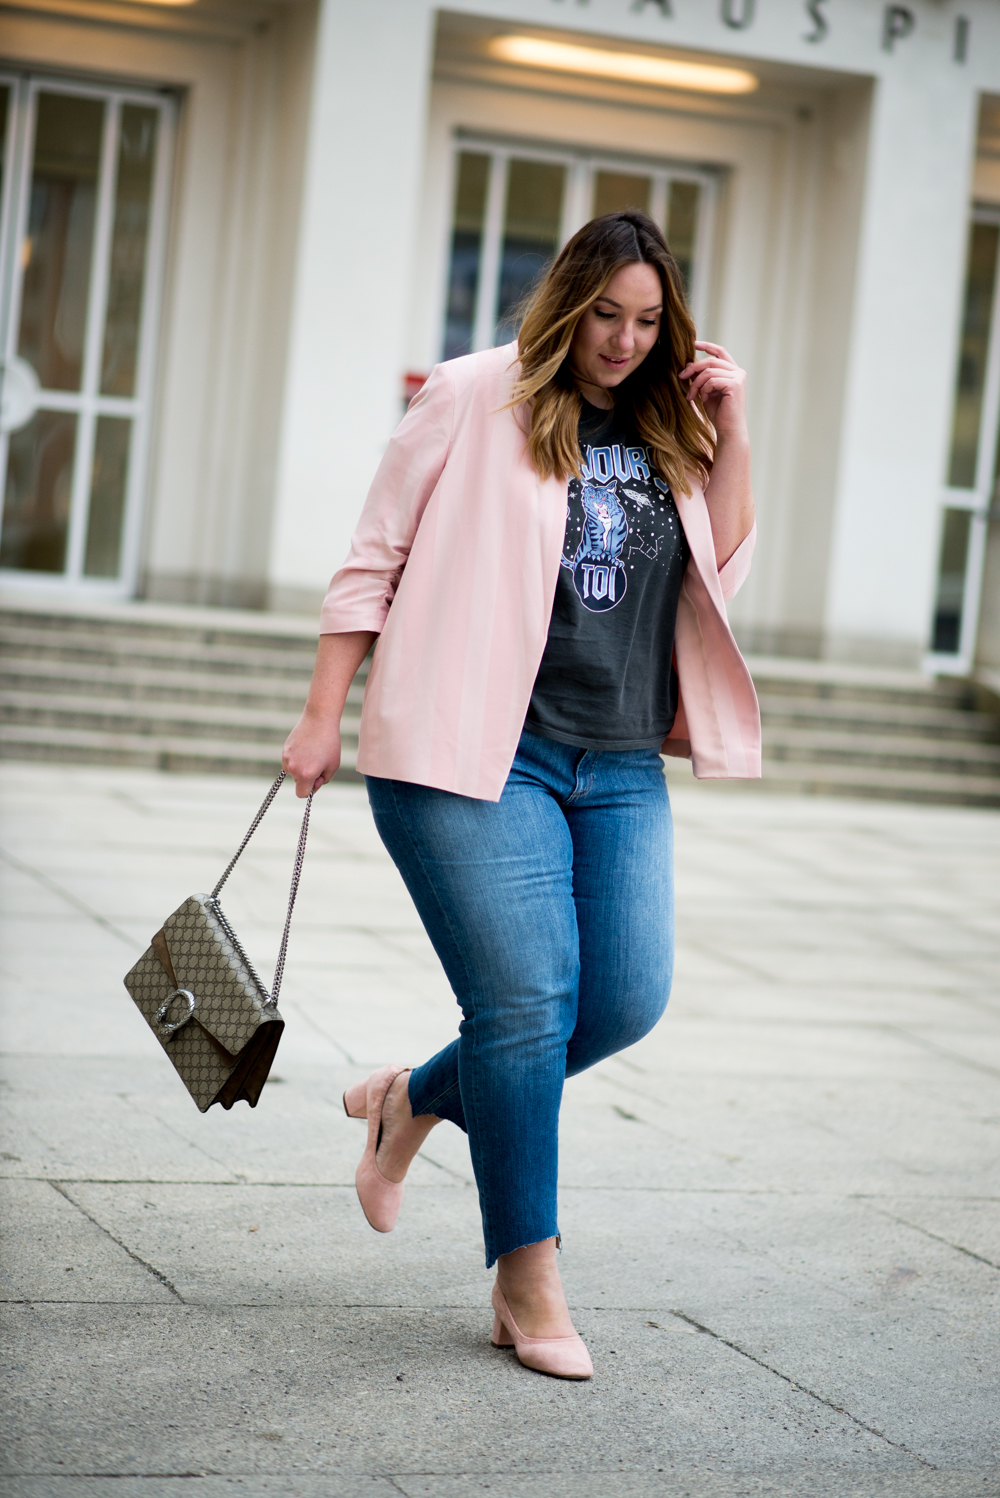 The Skinny and the Curvy One_Plussize_Blogger_Fashionblog Deutschland_Blogger_Curve Fashion (7 von 8)